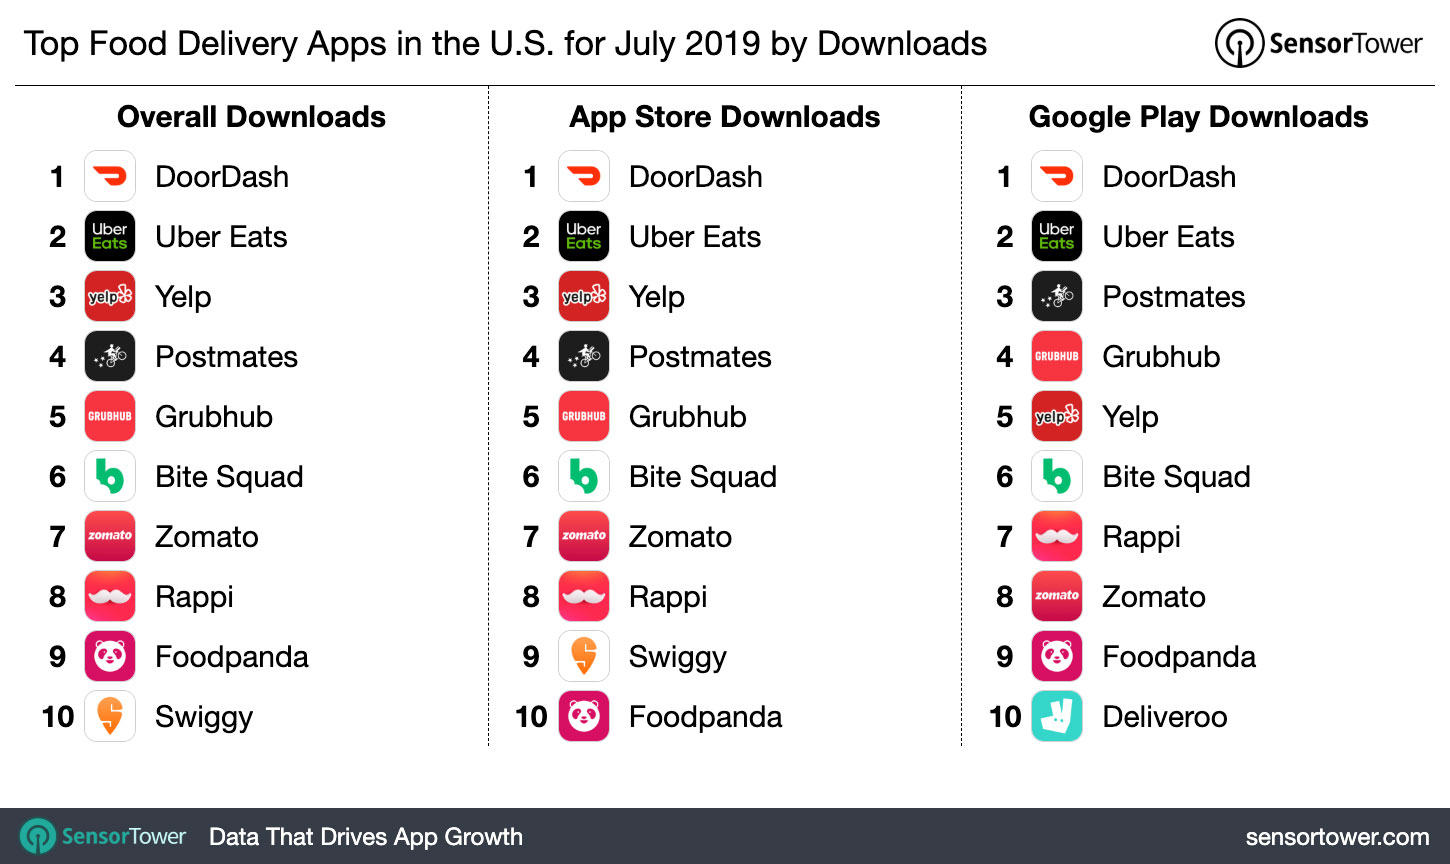 Top Food Delivery Apps in the U.S. for July 2019 by Downloads